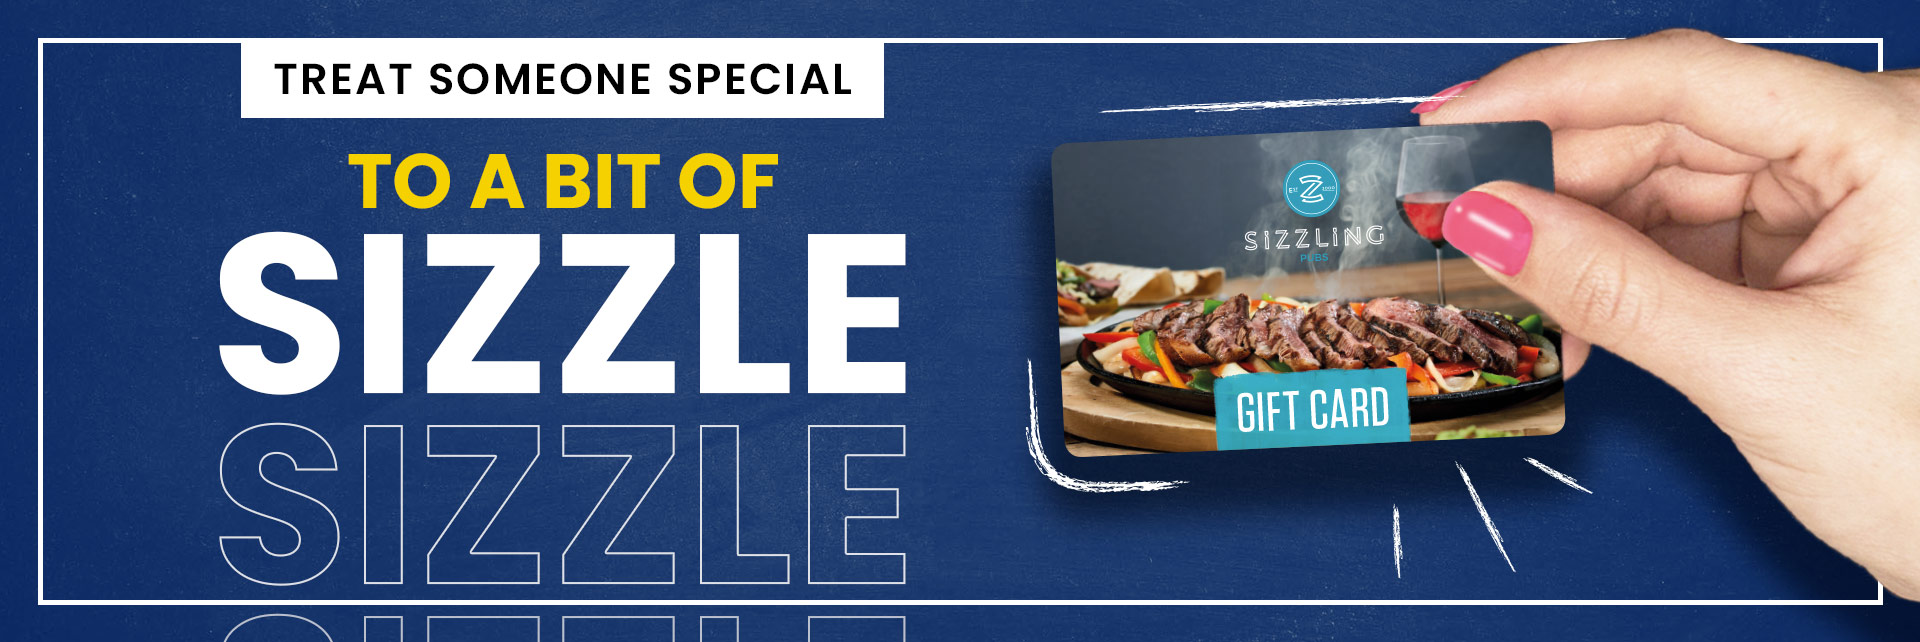 Sizzling Pubs Gift Card at The Jubilee Inn in Grimsby